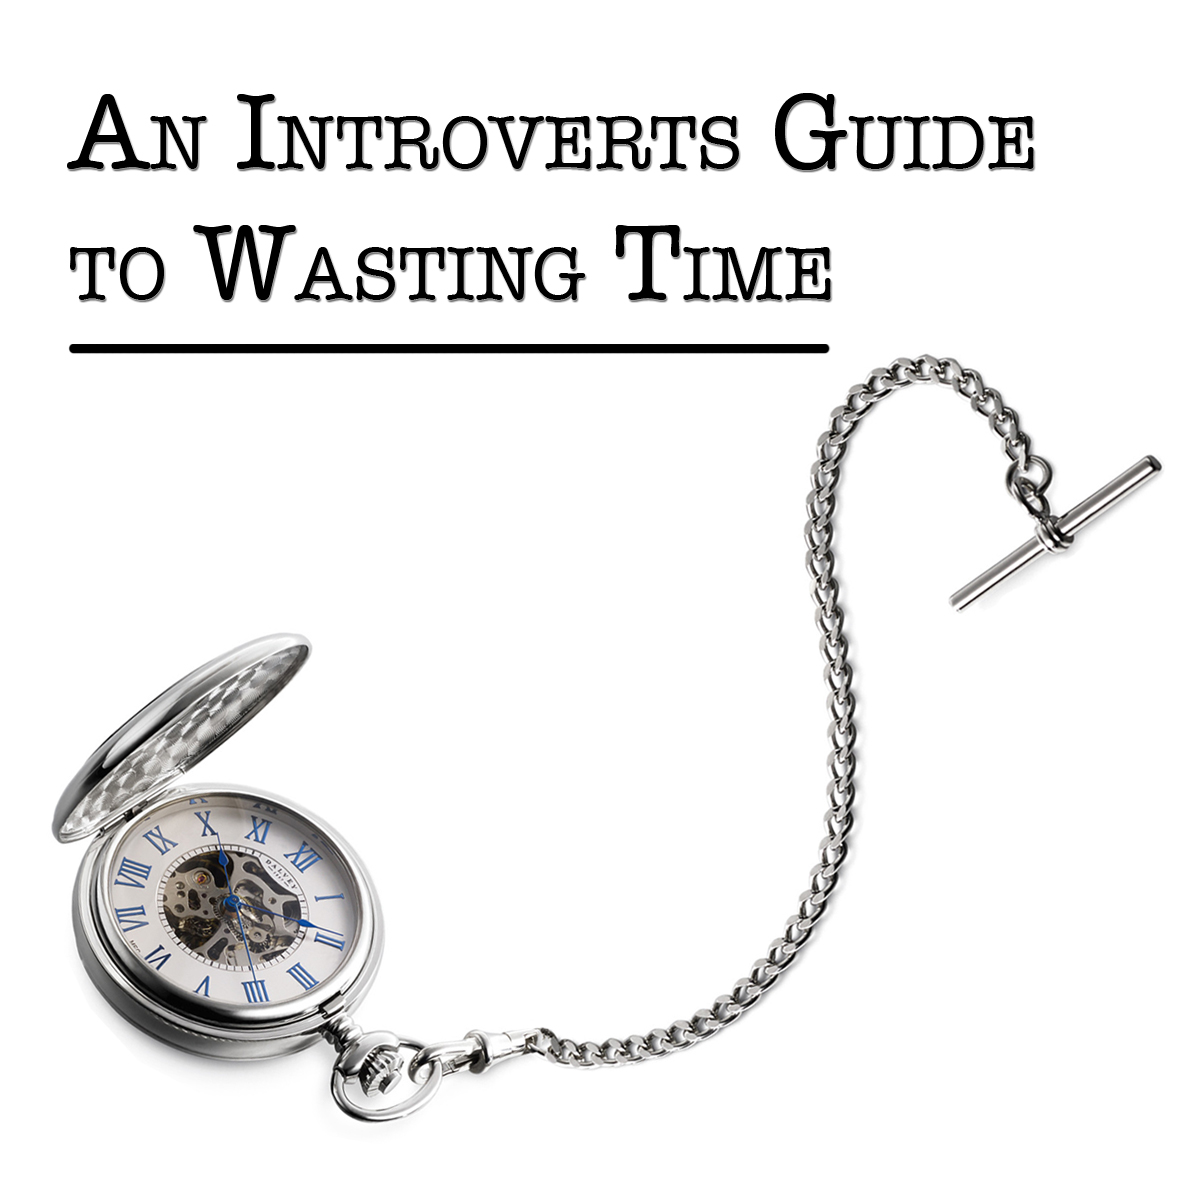 An Introvert’s Guide to Wasting Time: Episode 1